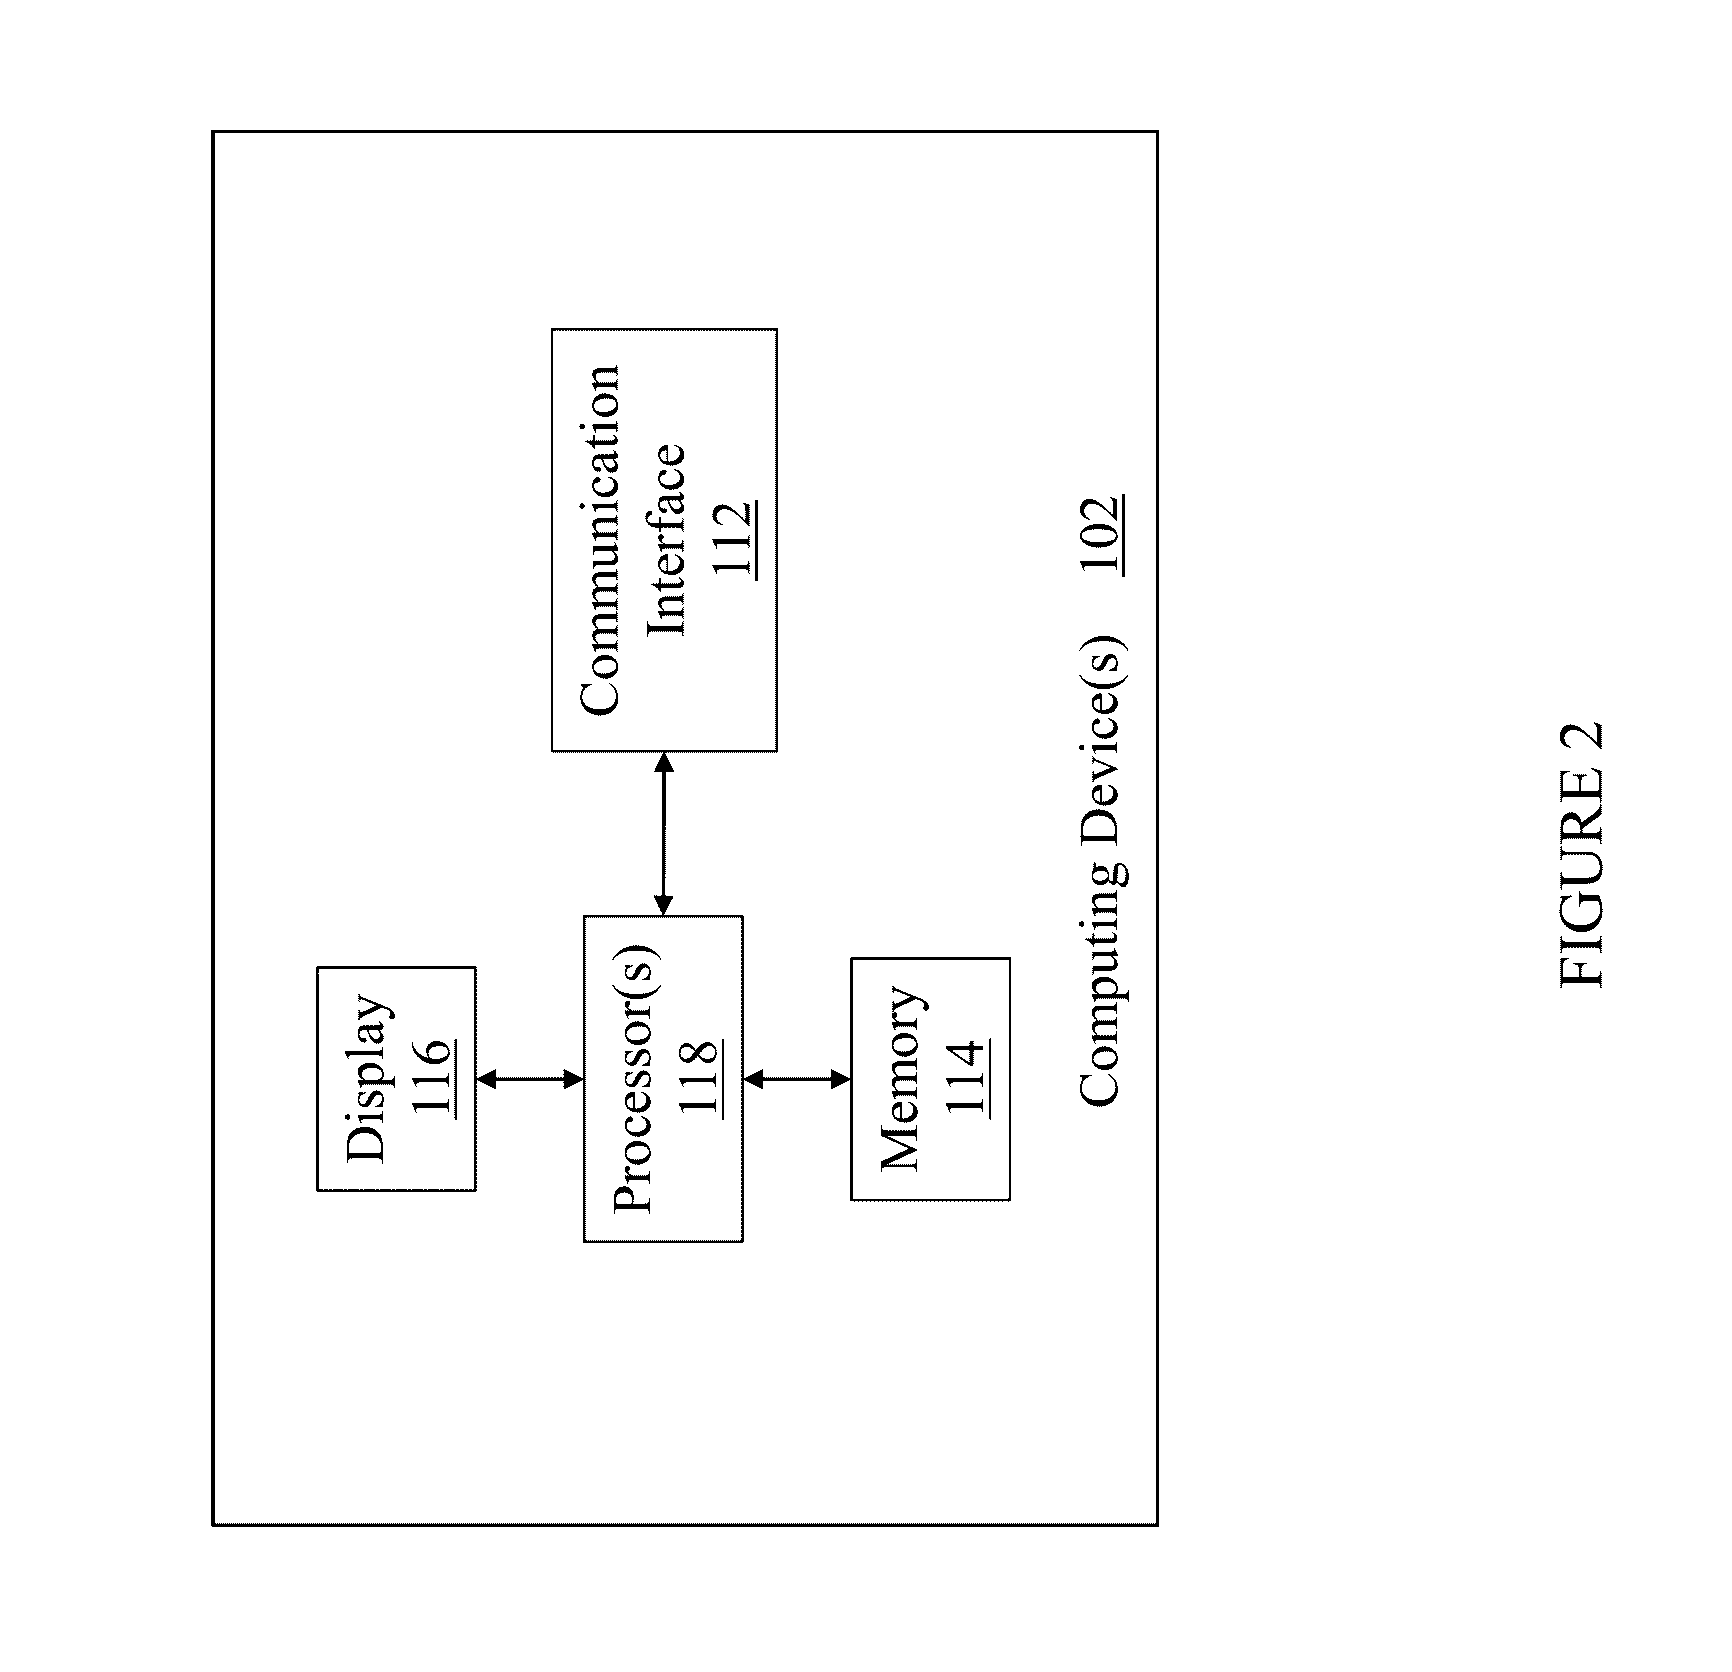 System and method for monitoring and anaylzing animal related data